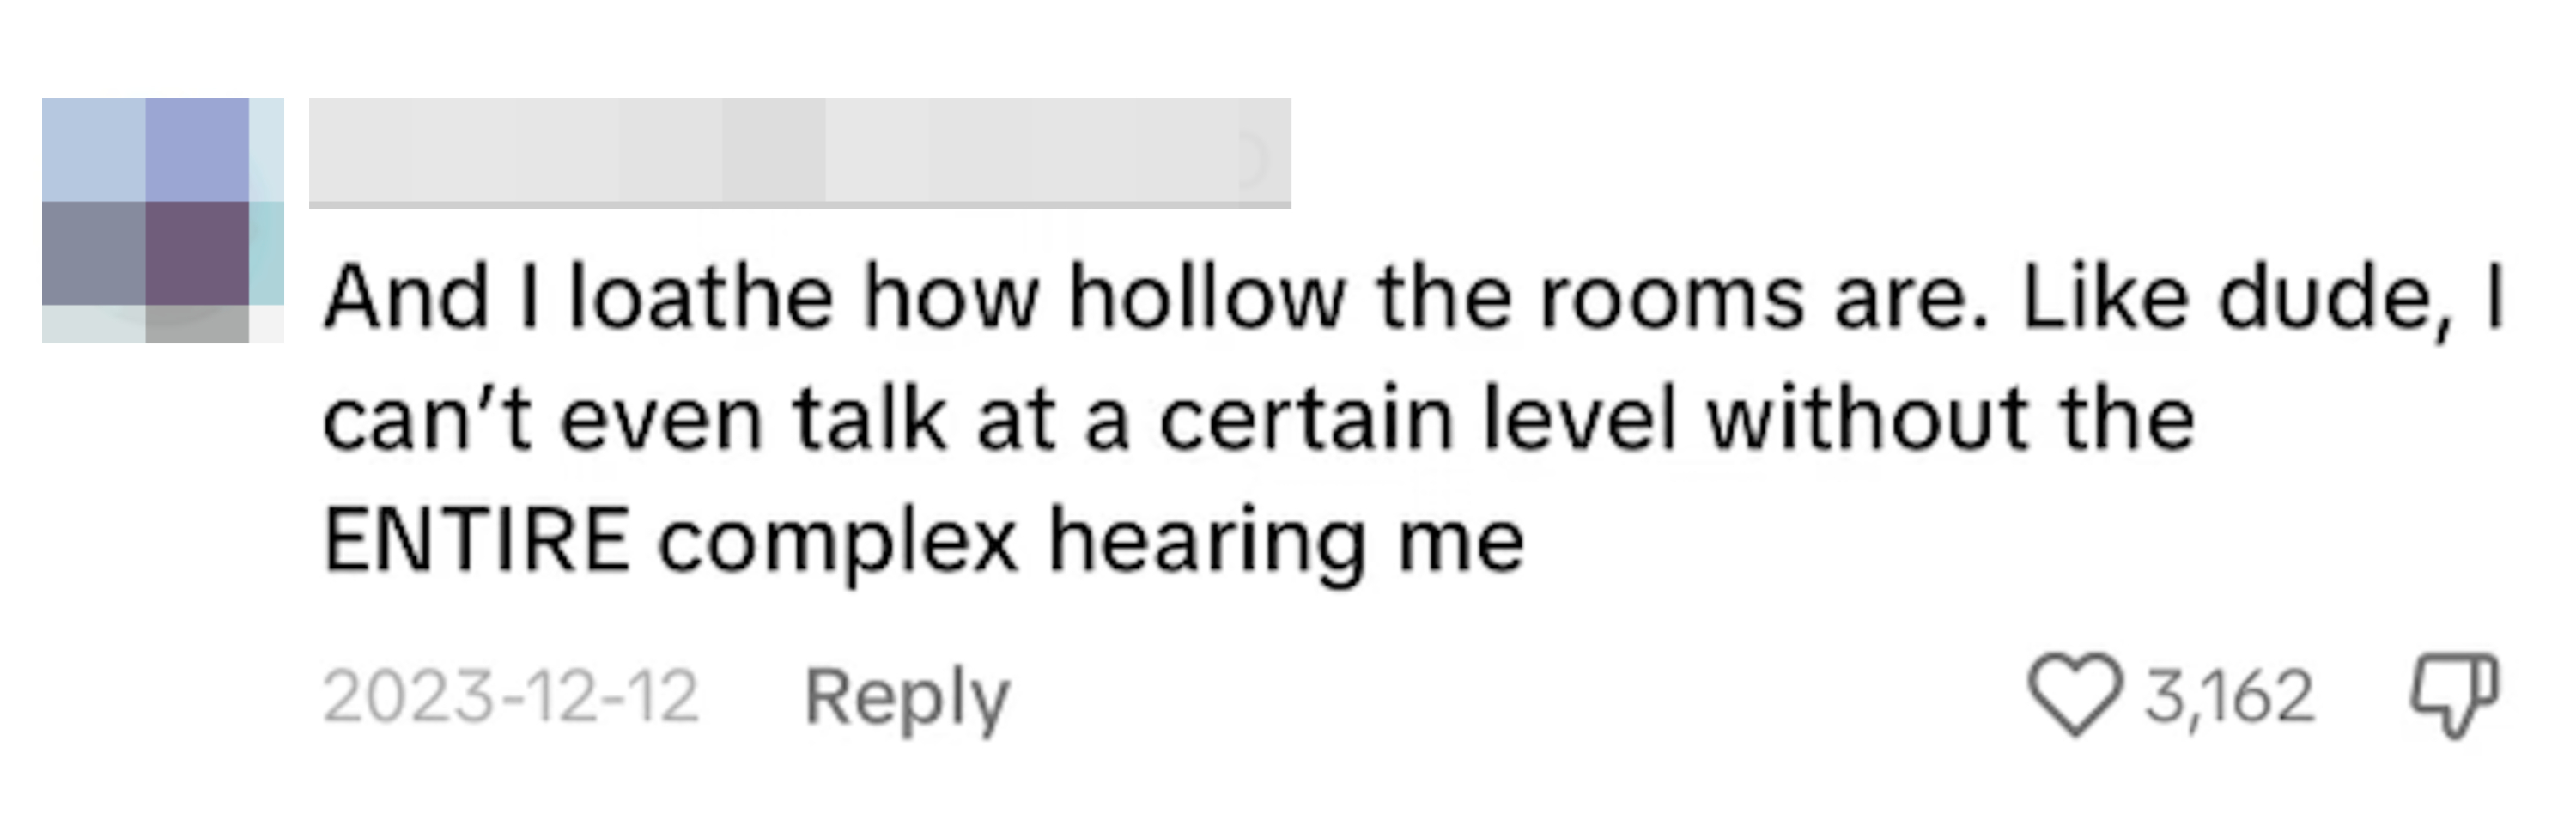 Comment saying &quot;And I loathe how hollow the rooms are&quot;